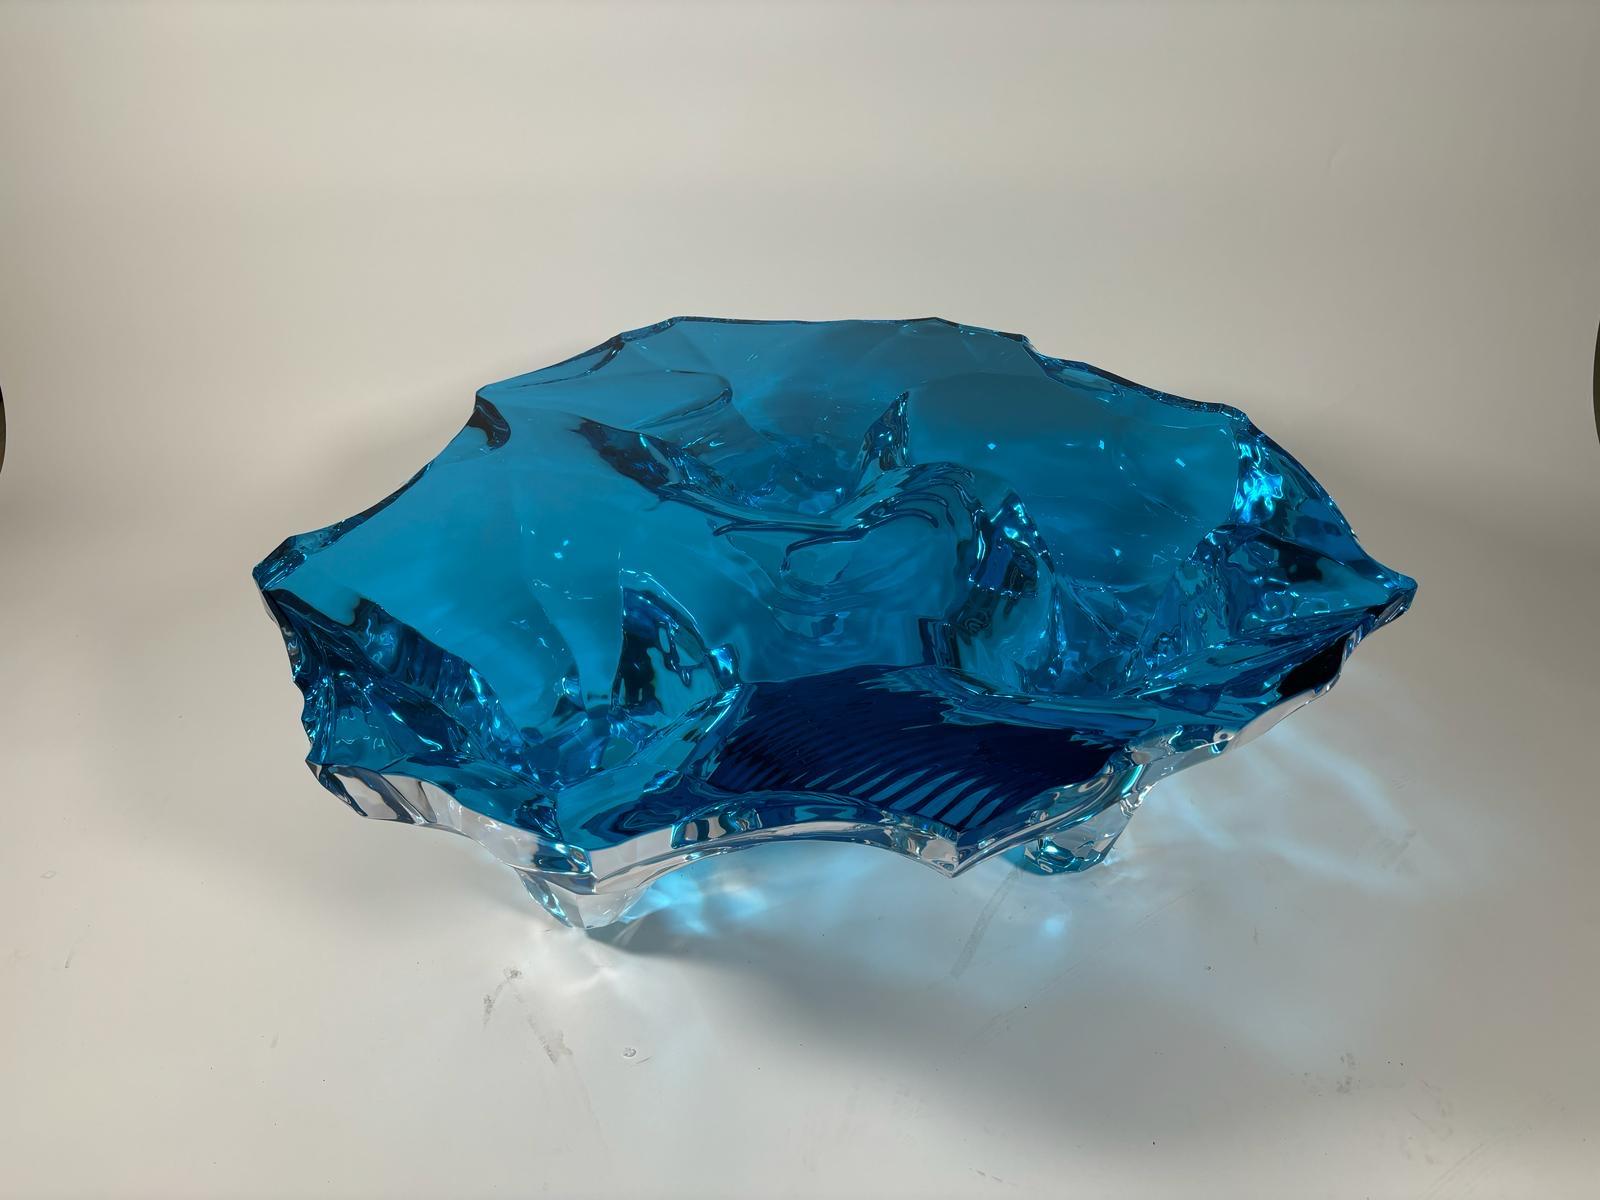 Coffee table Glacialis azure small version designed by Marco Pettinari for Superego Editions.
This sculpture/coffee table made from a transparent Plexiglas block, it made by hand and with numerical control machinery.
Limited edition of 9